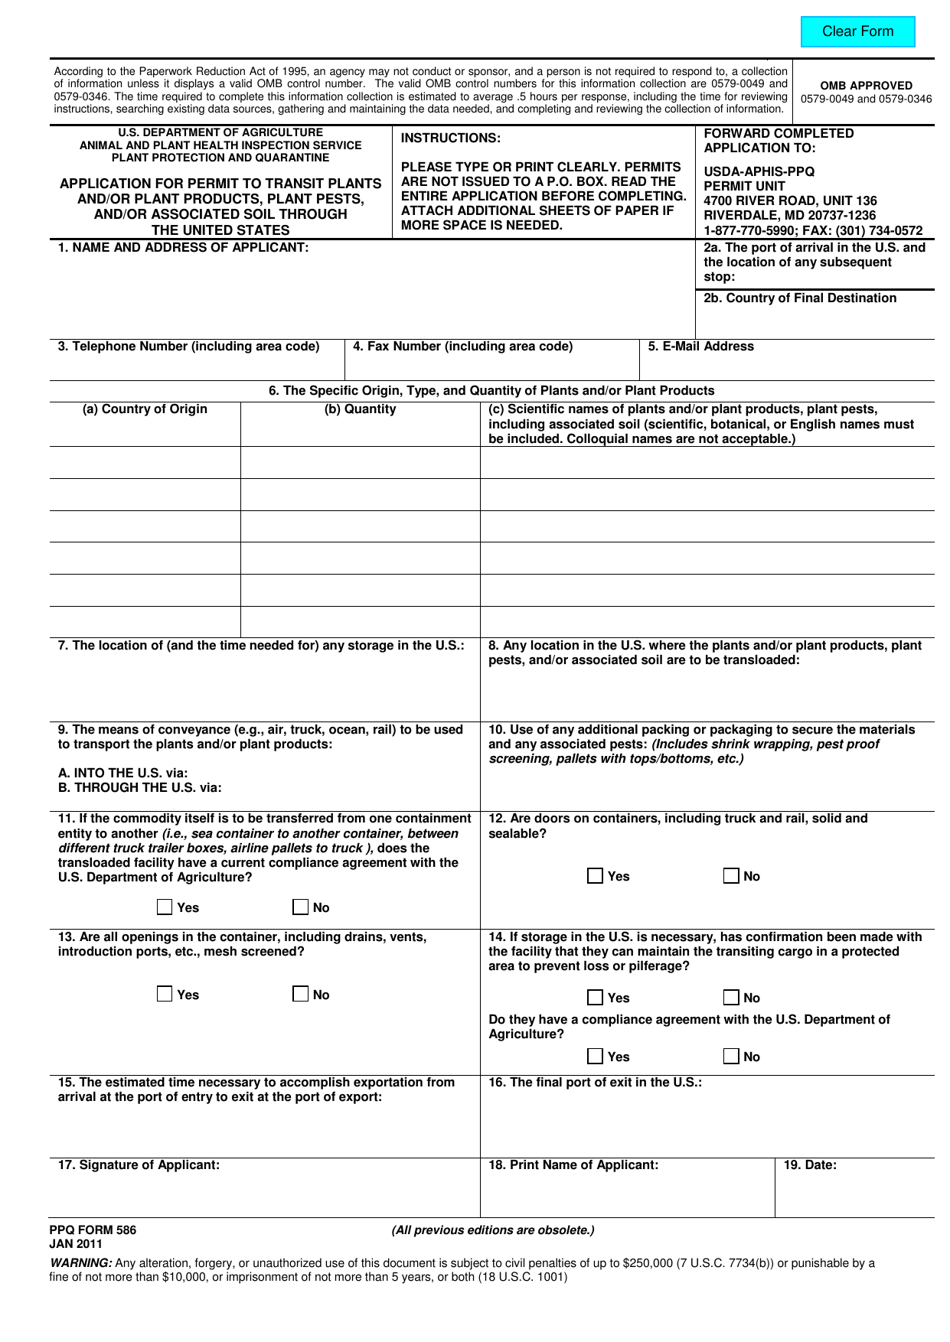 PPQ Form 586 Application for Permit to Transit Plants and / or Plant Products, Plant Pests, and / or Associated Soil Through the United States, Page 1